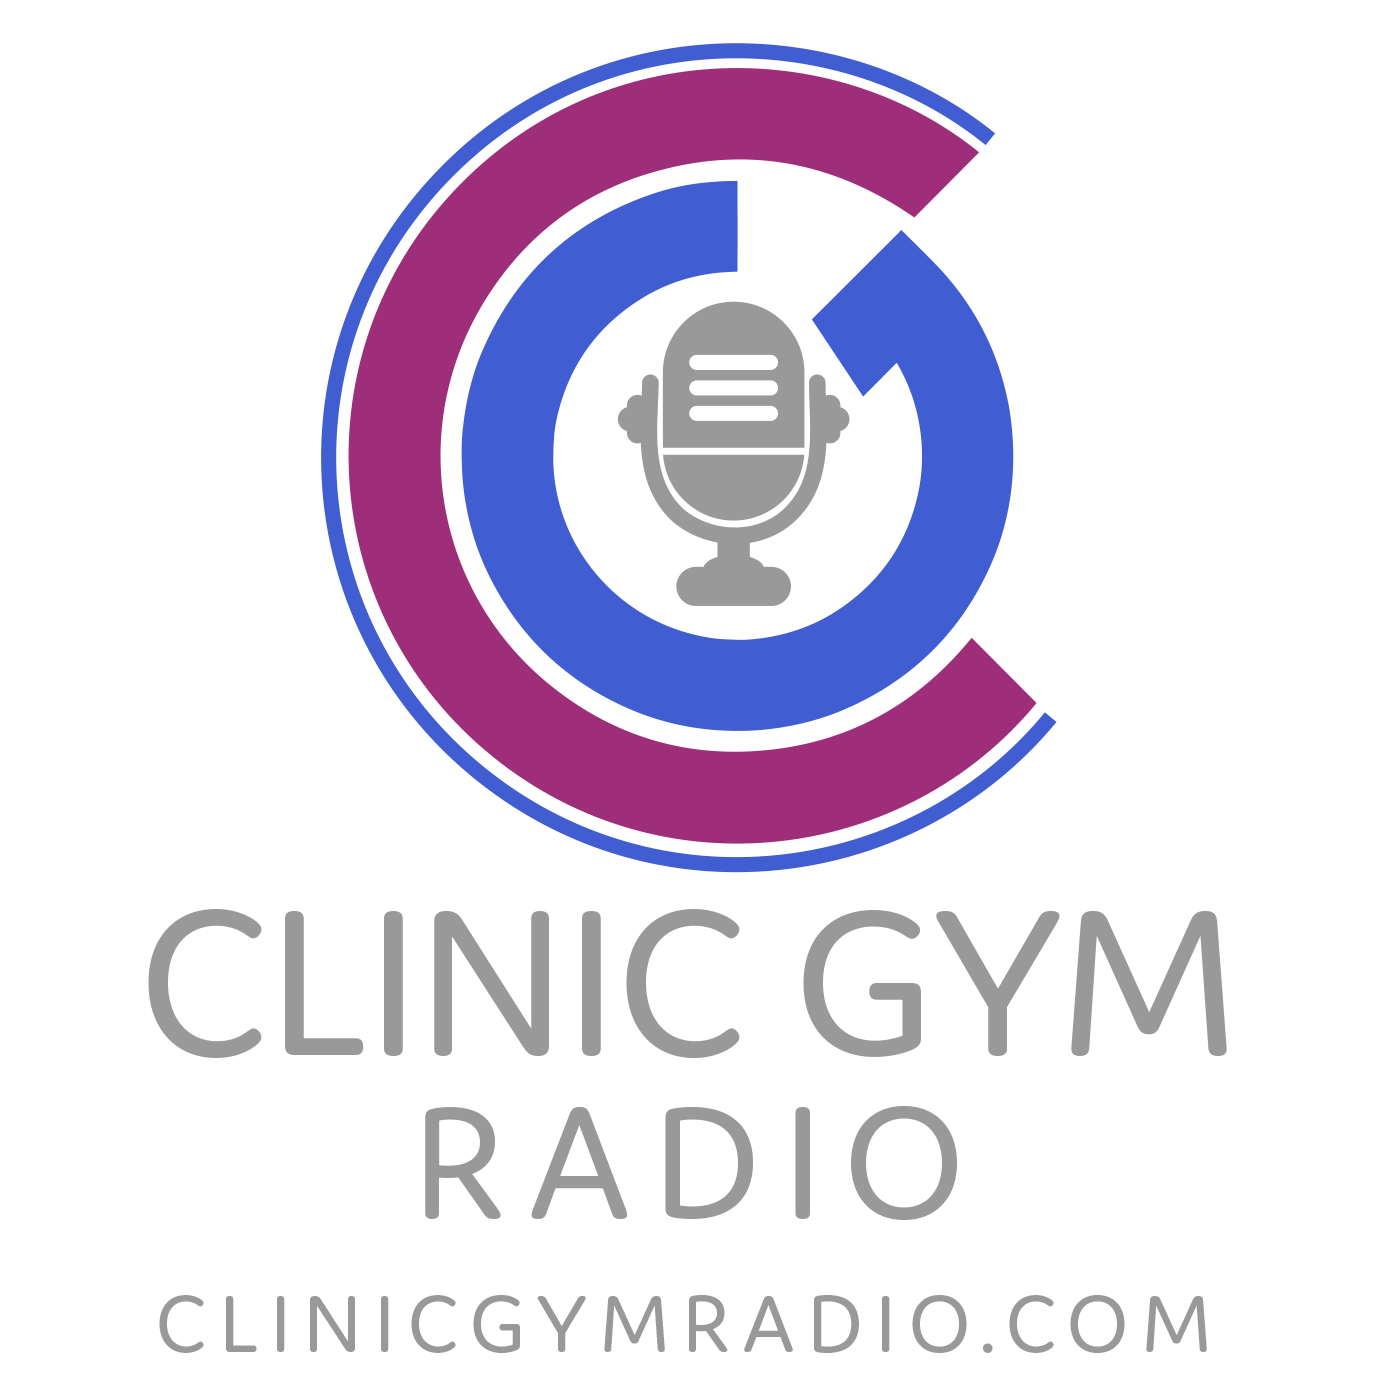 What is a Clinic Gym Hybrid in 2022?